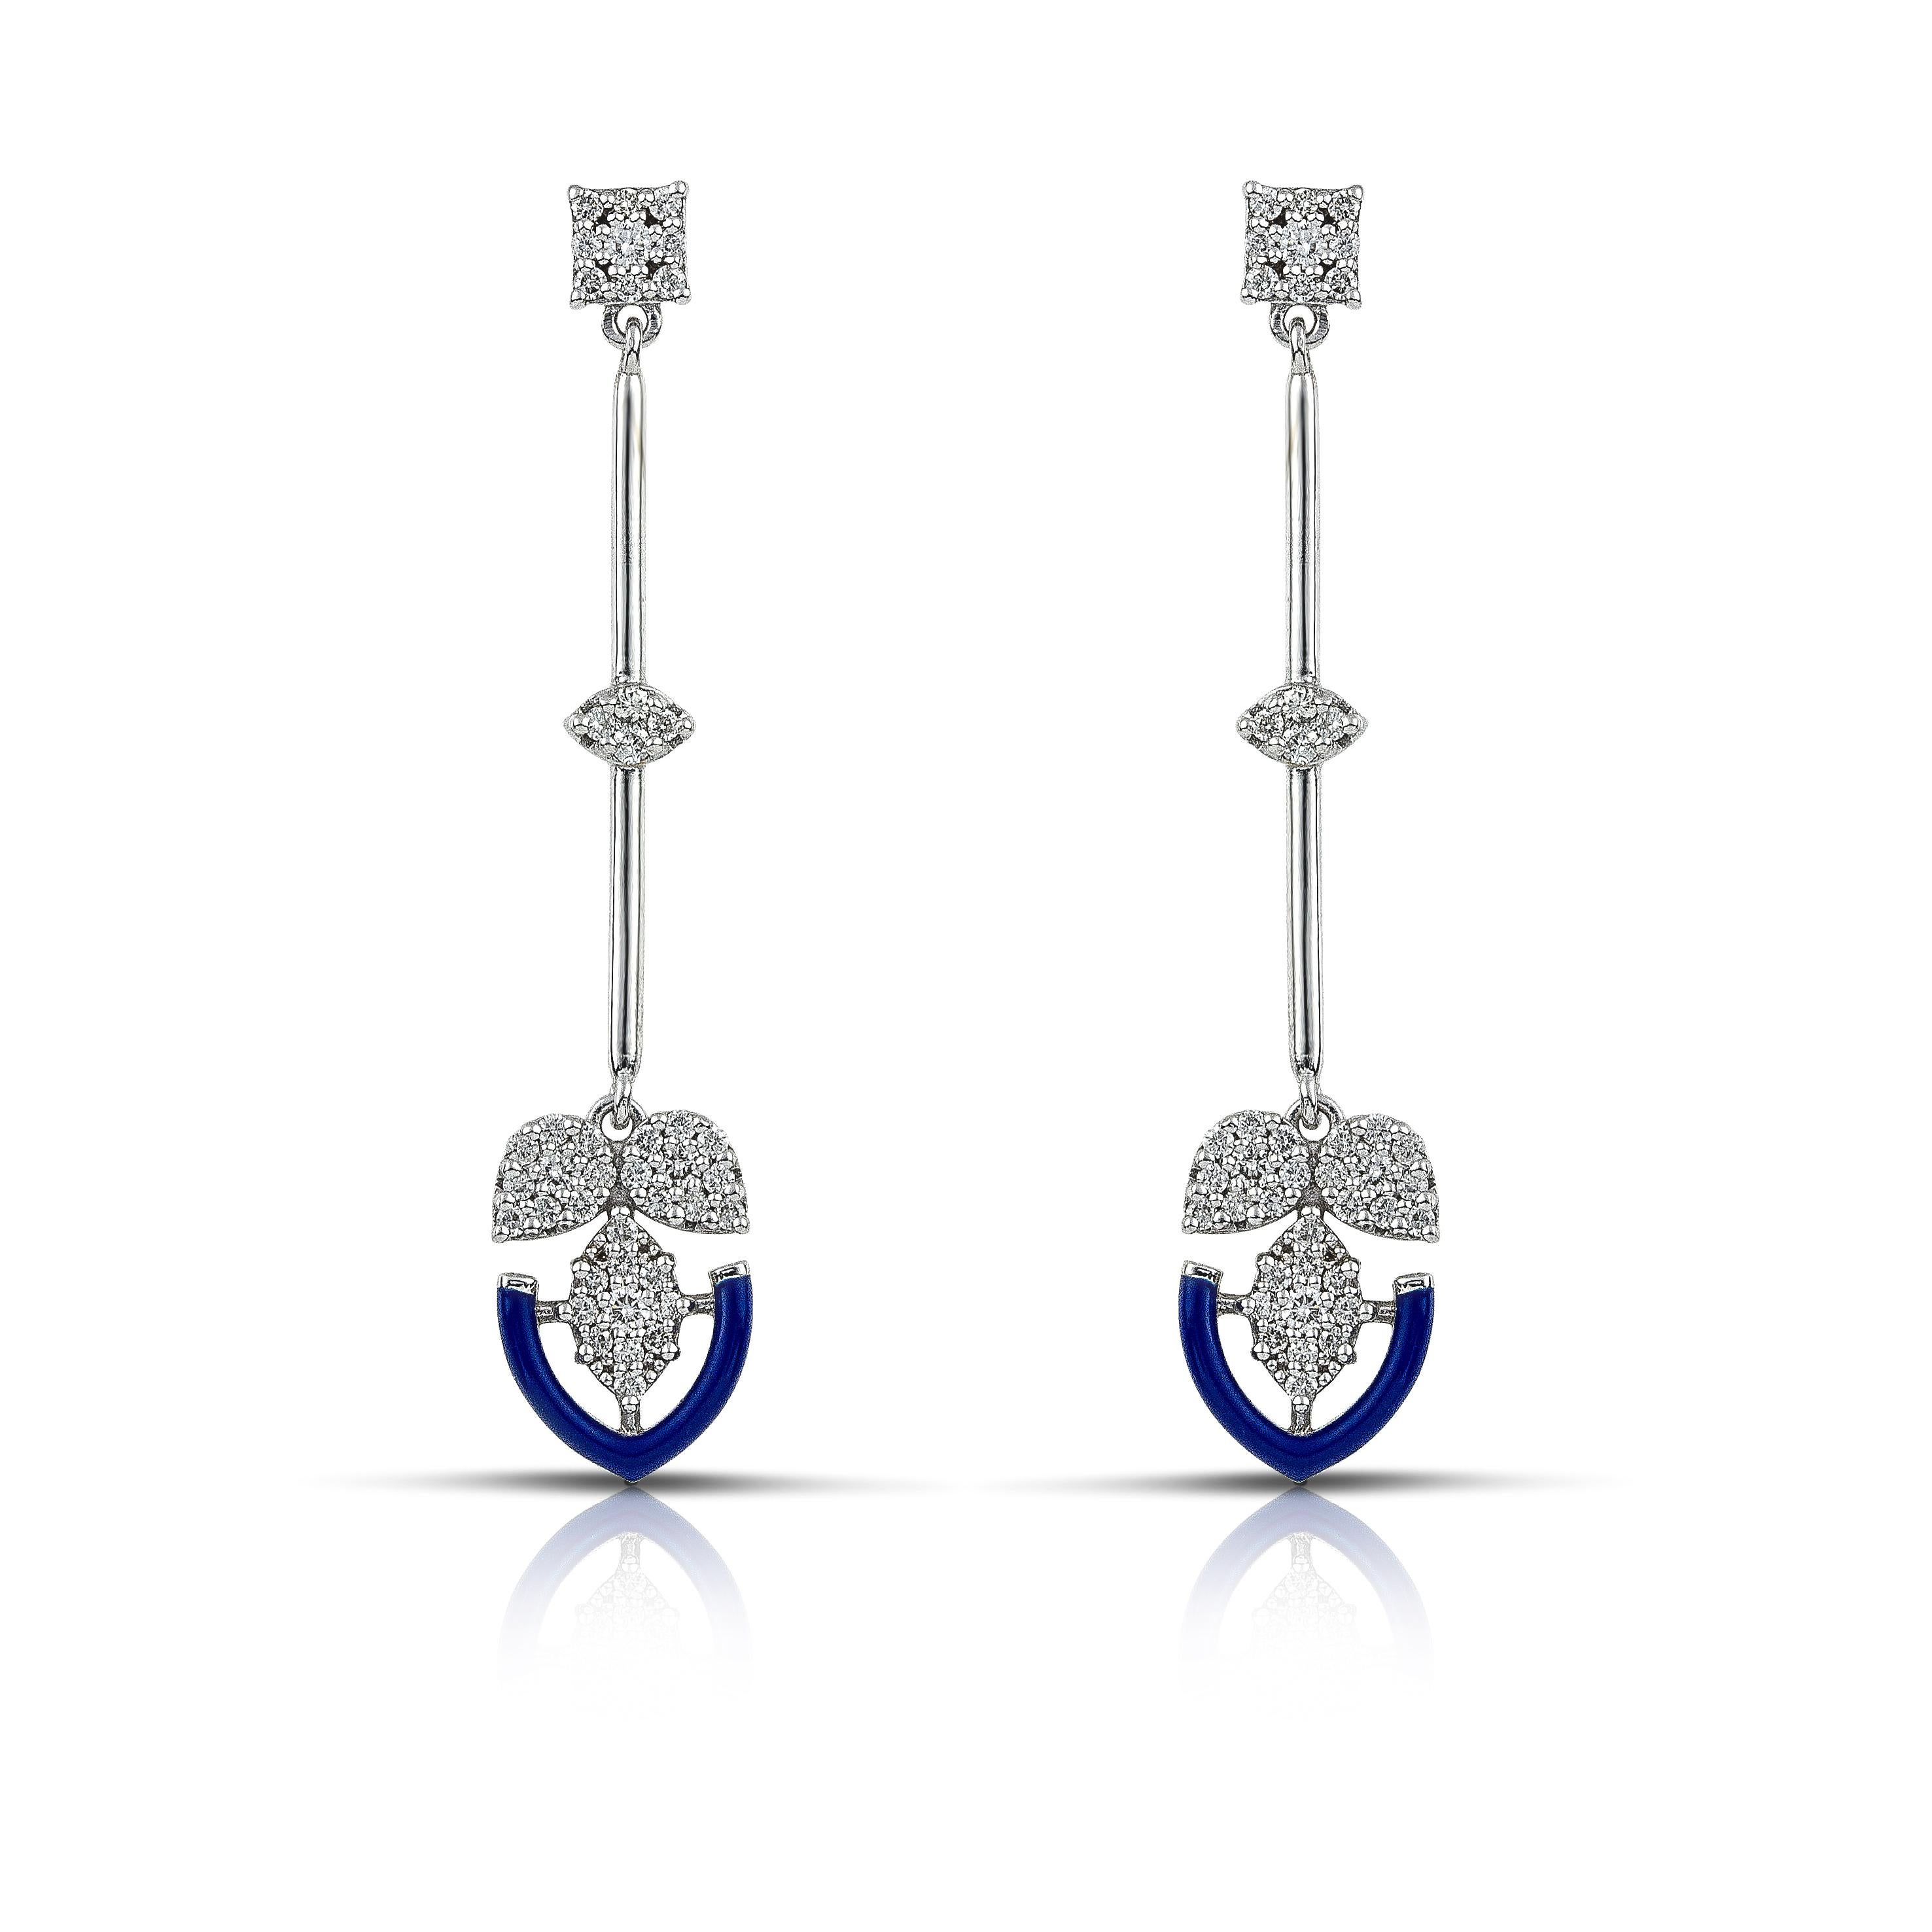 Artist Forever Gold Earrings with Diamonds and Navy Enamel For Sale